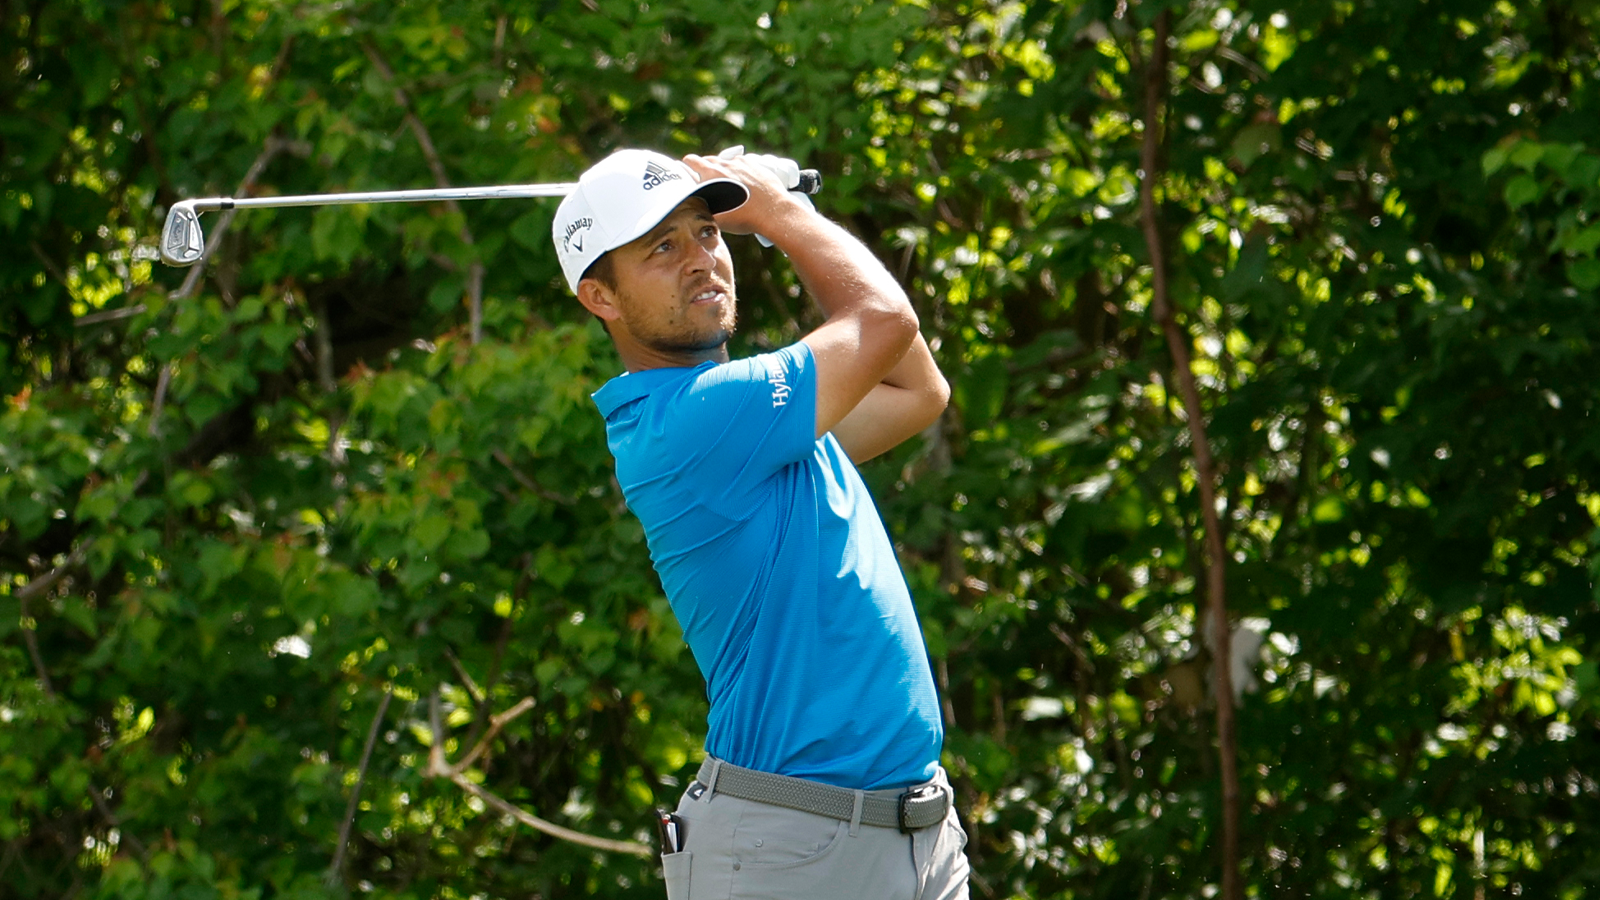 Xander Schauffele plays his shot during the second round at TPC Louisiana.